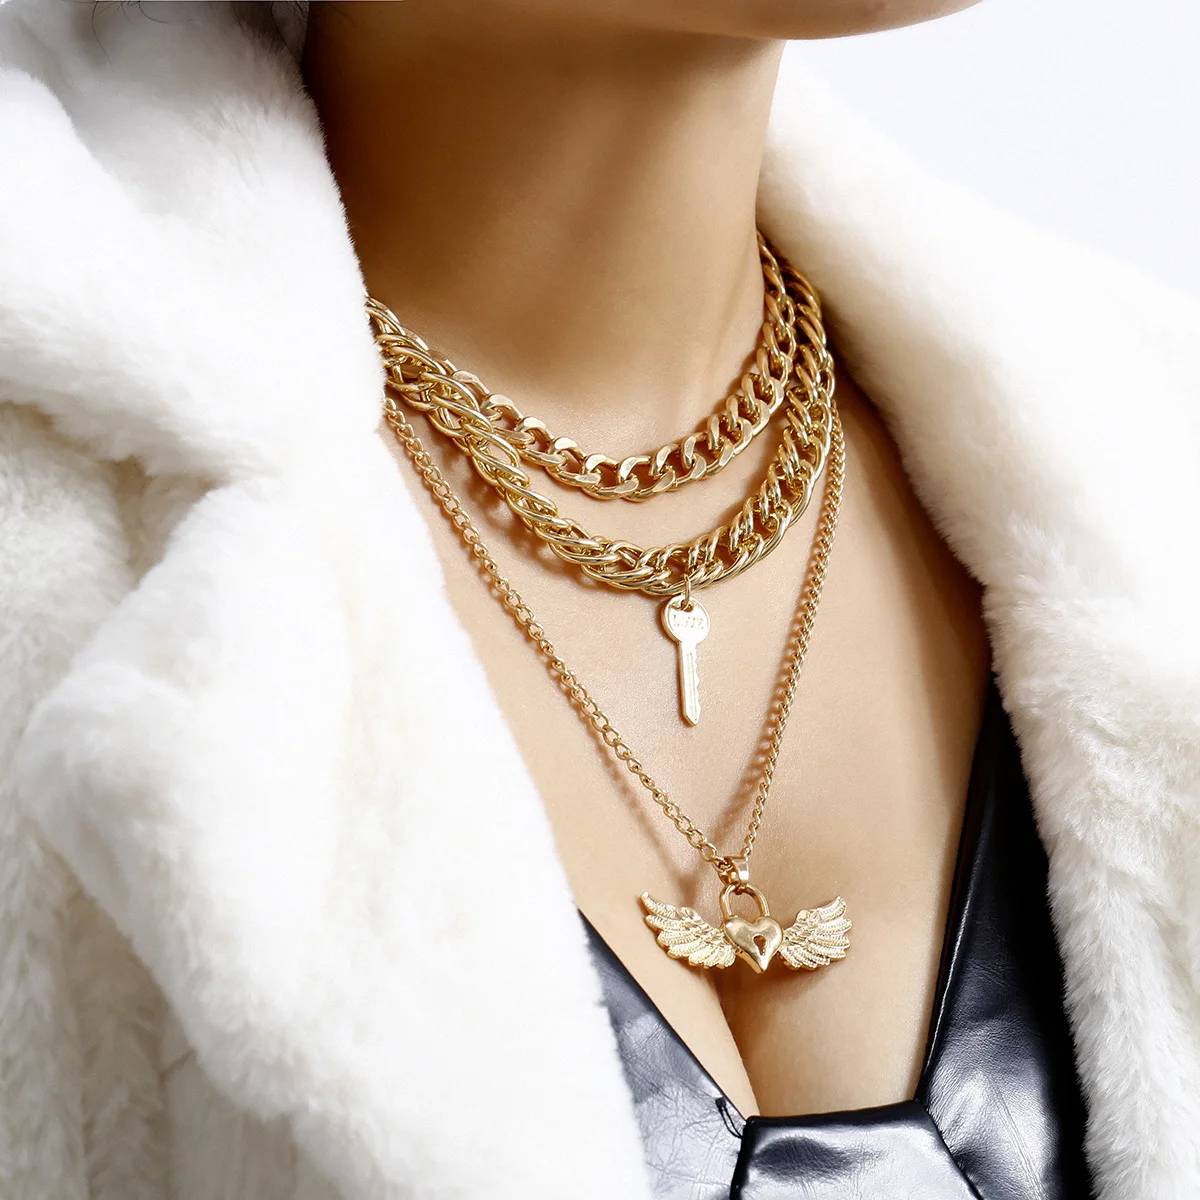 

Multi Layered All-Match Thick Chain Love Lock Key Clavicle Chain Gold Choker Angel Wings Necklace, Picture shows